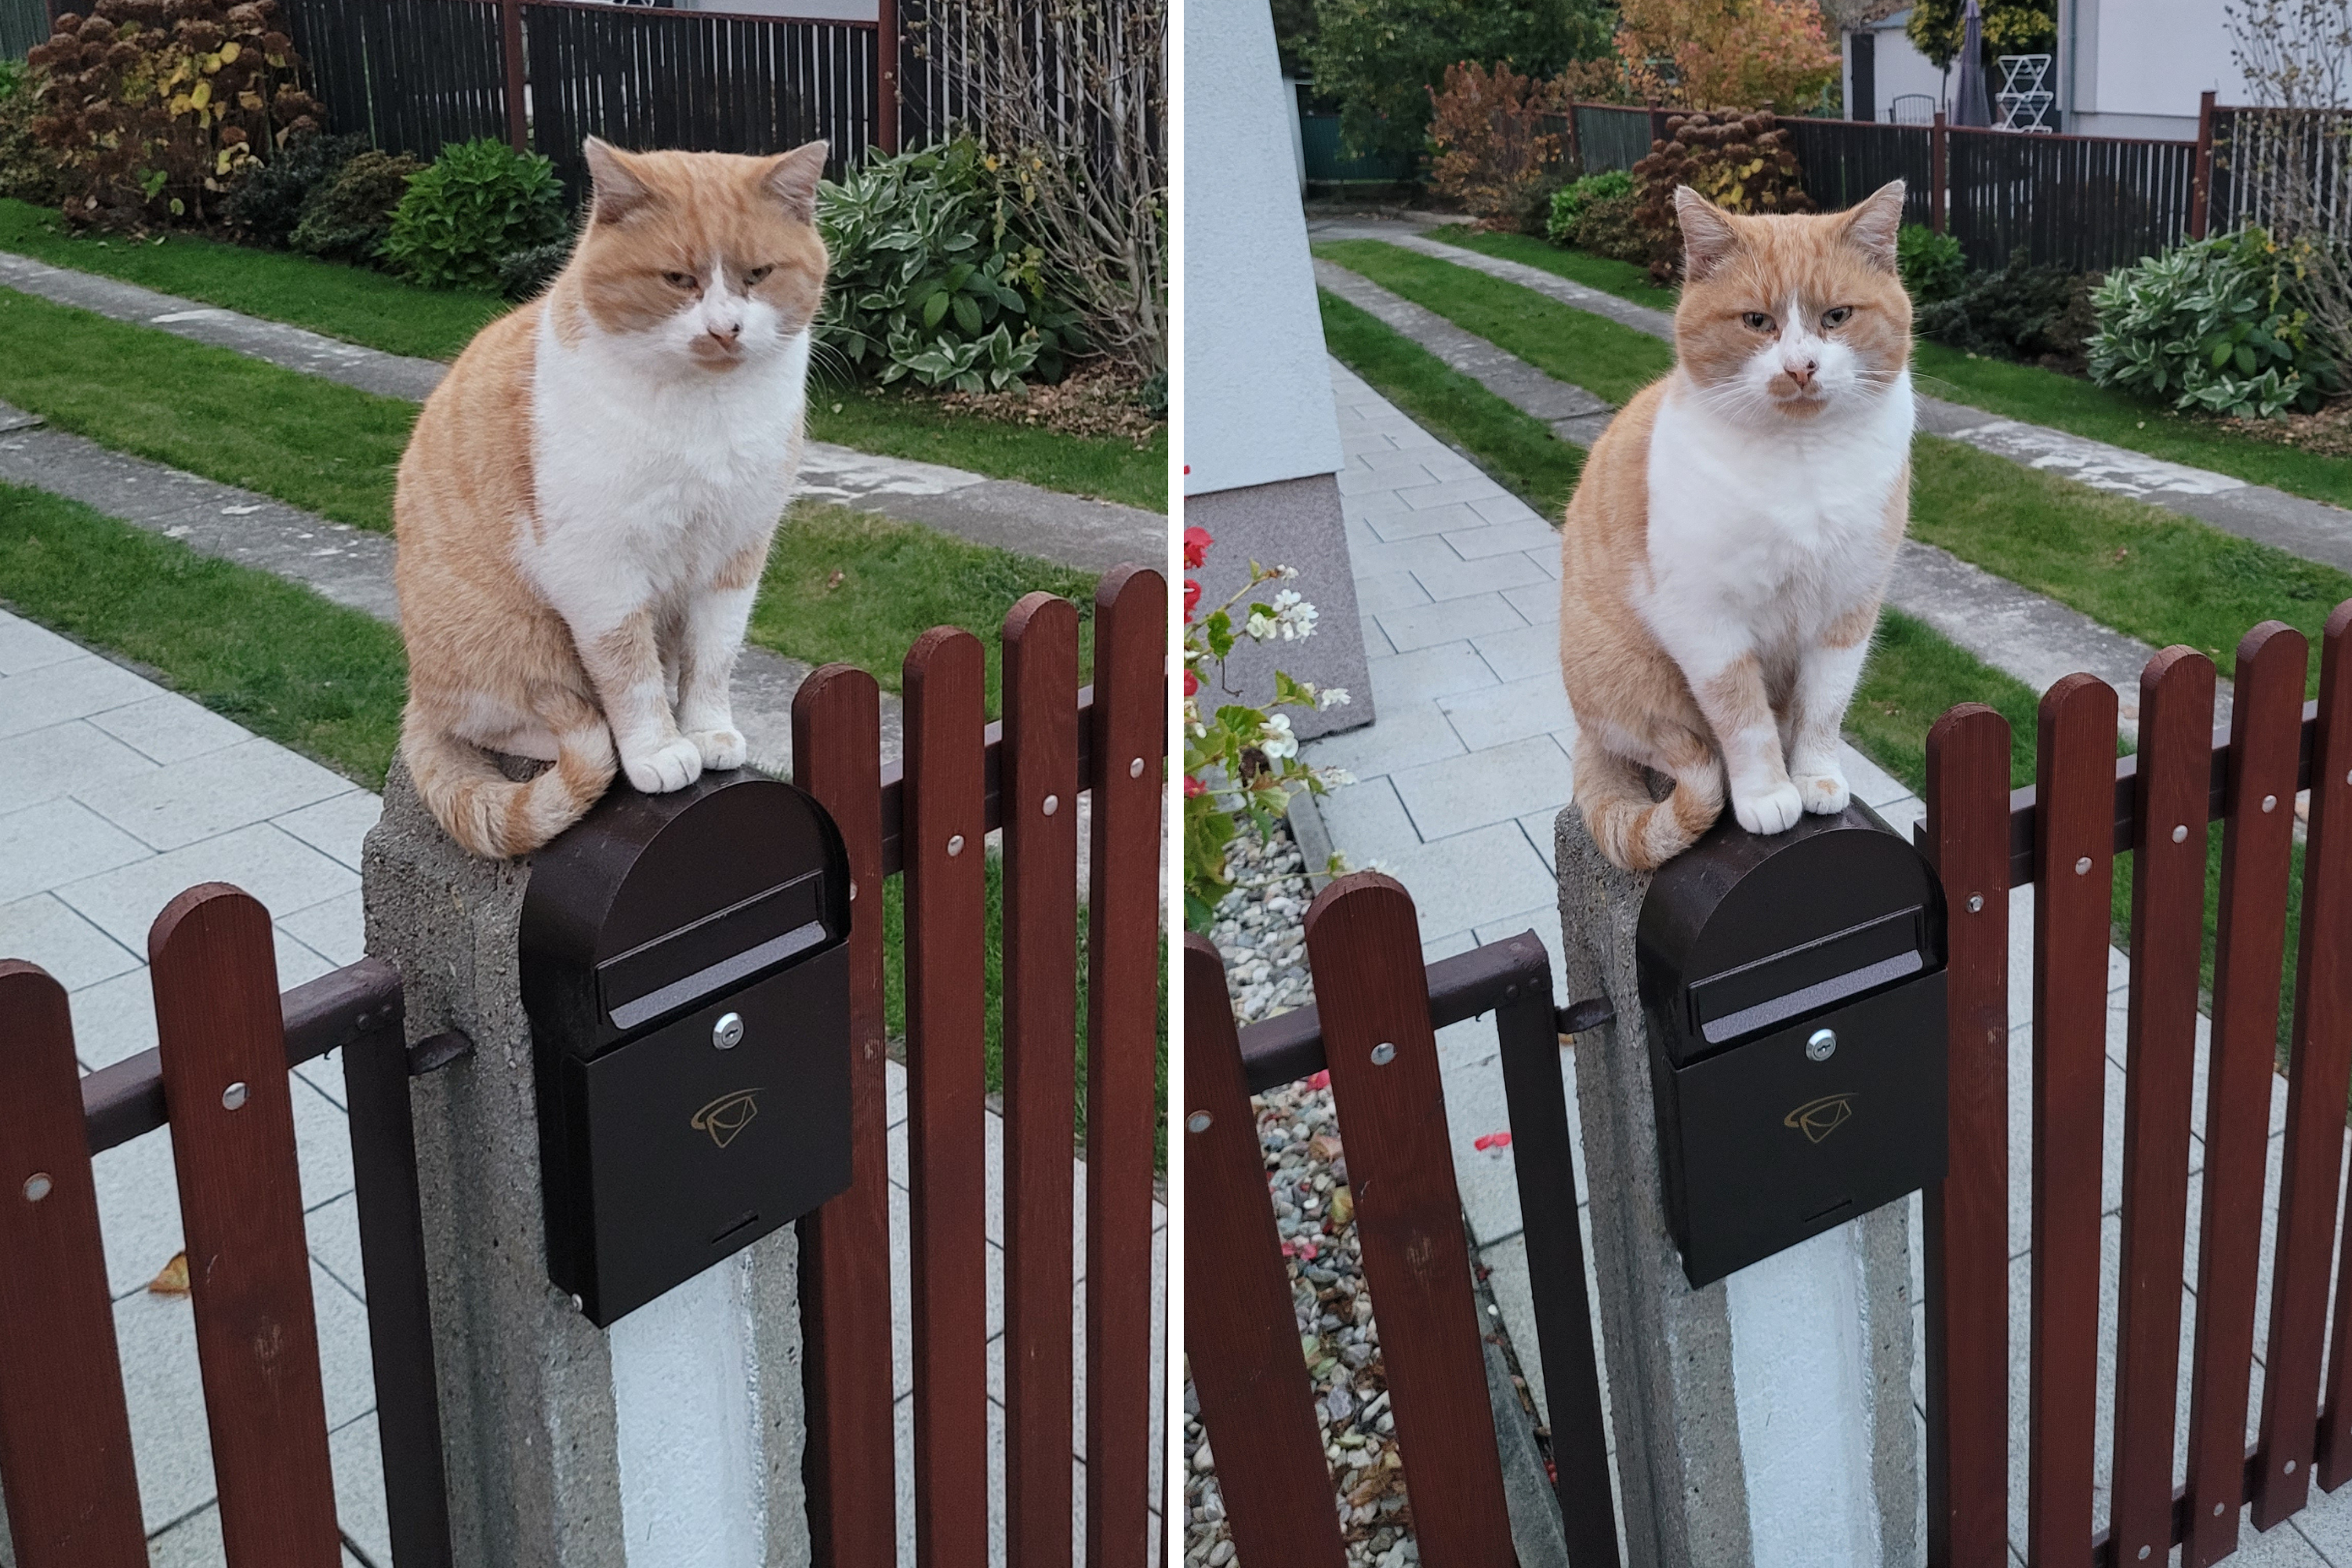 Mailman reveals the adorable reason his job isn’t as boring as people think